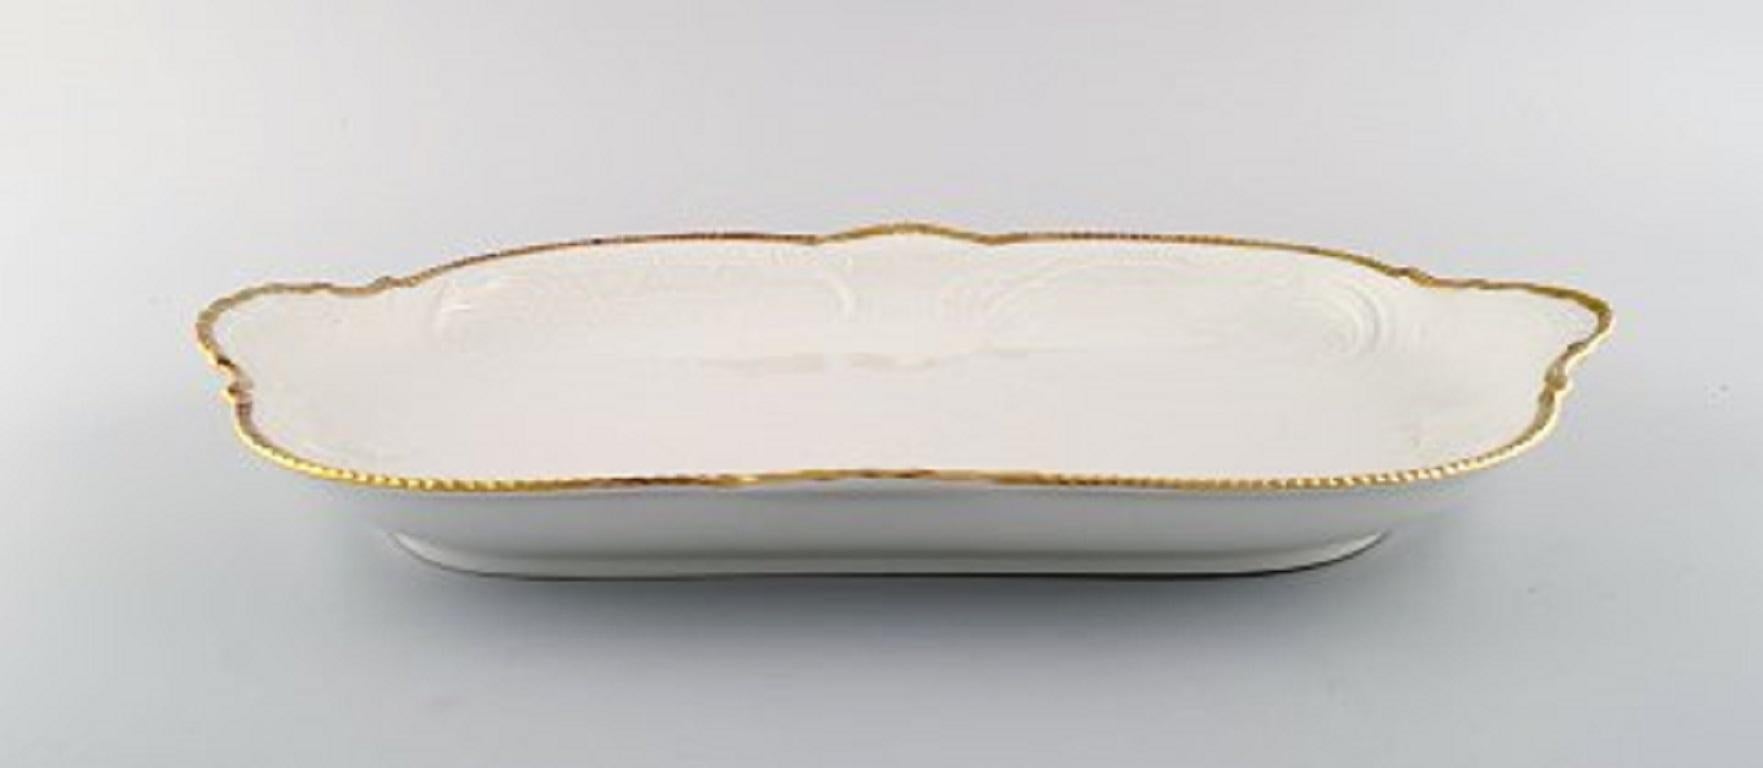 Large Rosenthal sans souci serving dish in porcelain with flowers and foliage in relief and gold edge,
20th century.
Measures: 39 x 24 x 4.5 cm.
In very good condition.
Stamped.